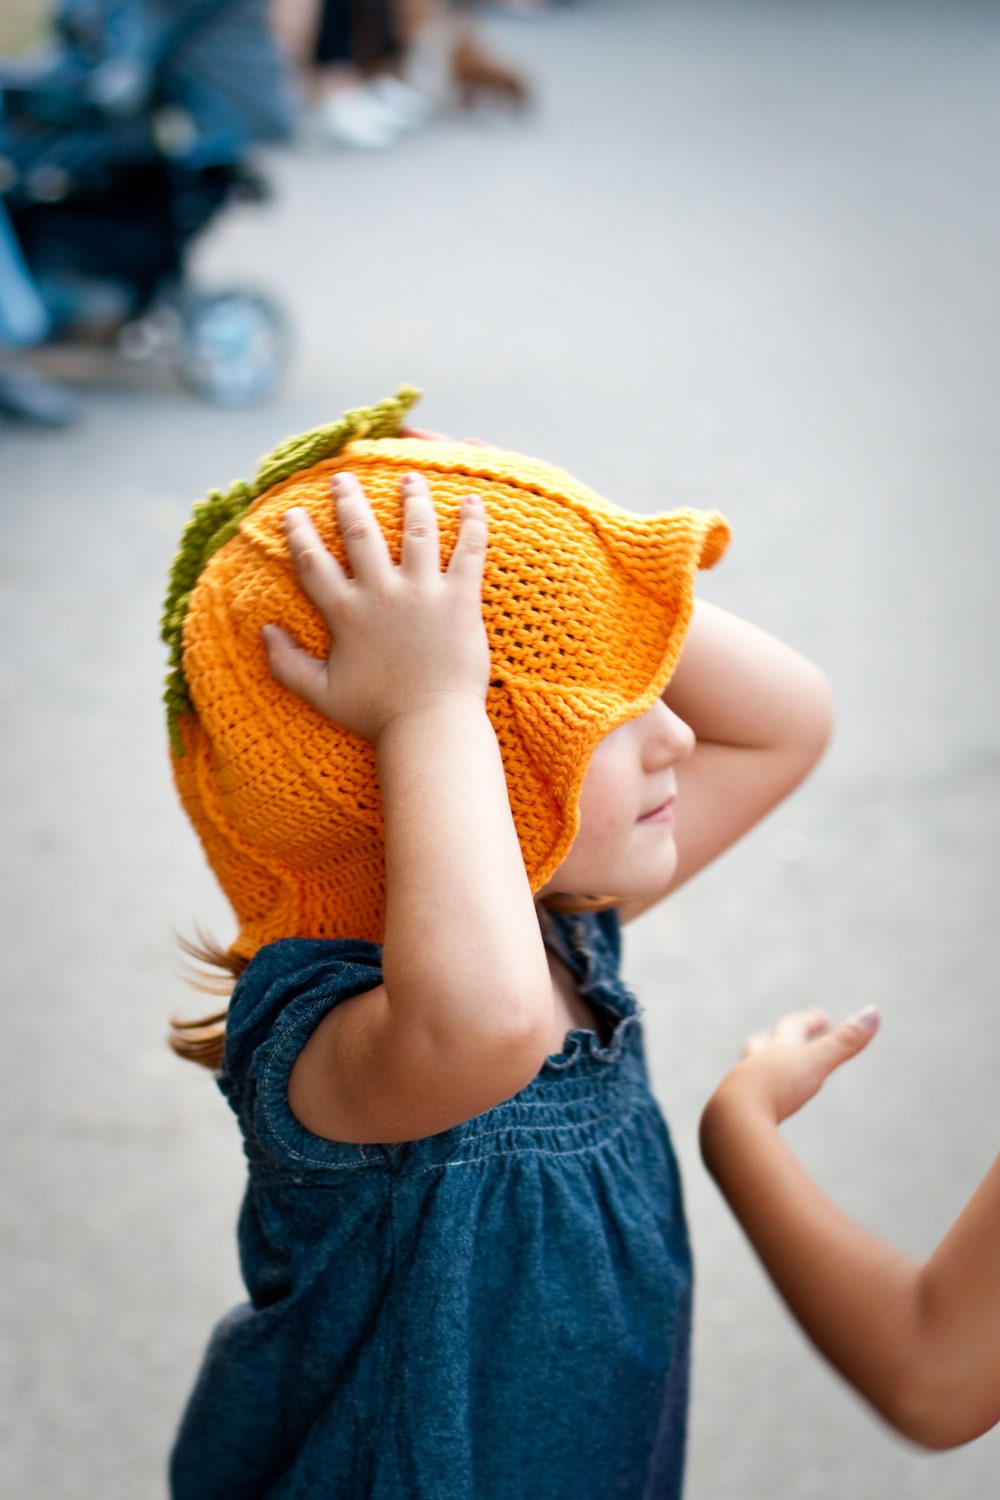 Crochet Funny Pumpkin Hat Girlie Orange Green Autumn Fall Accessories designed by dodofit on Etsy